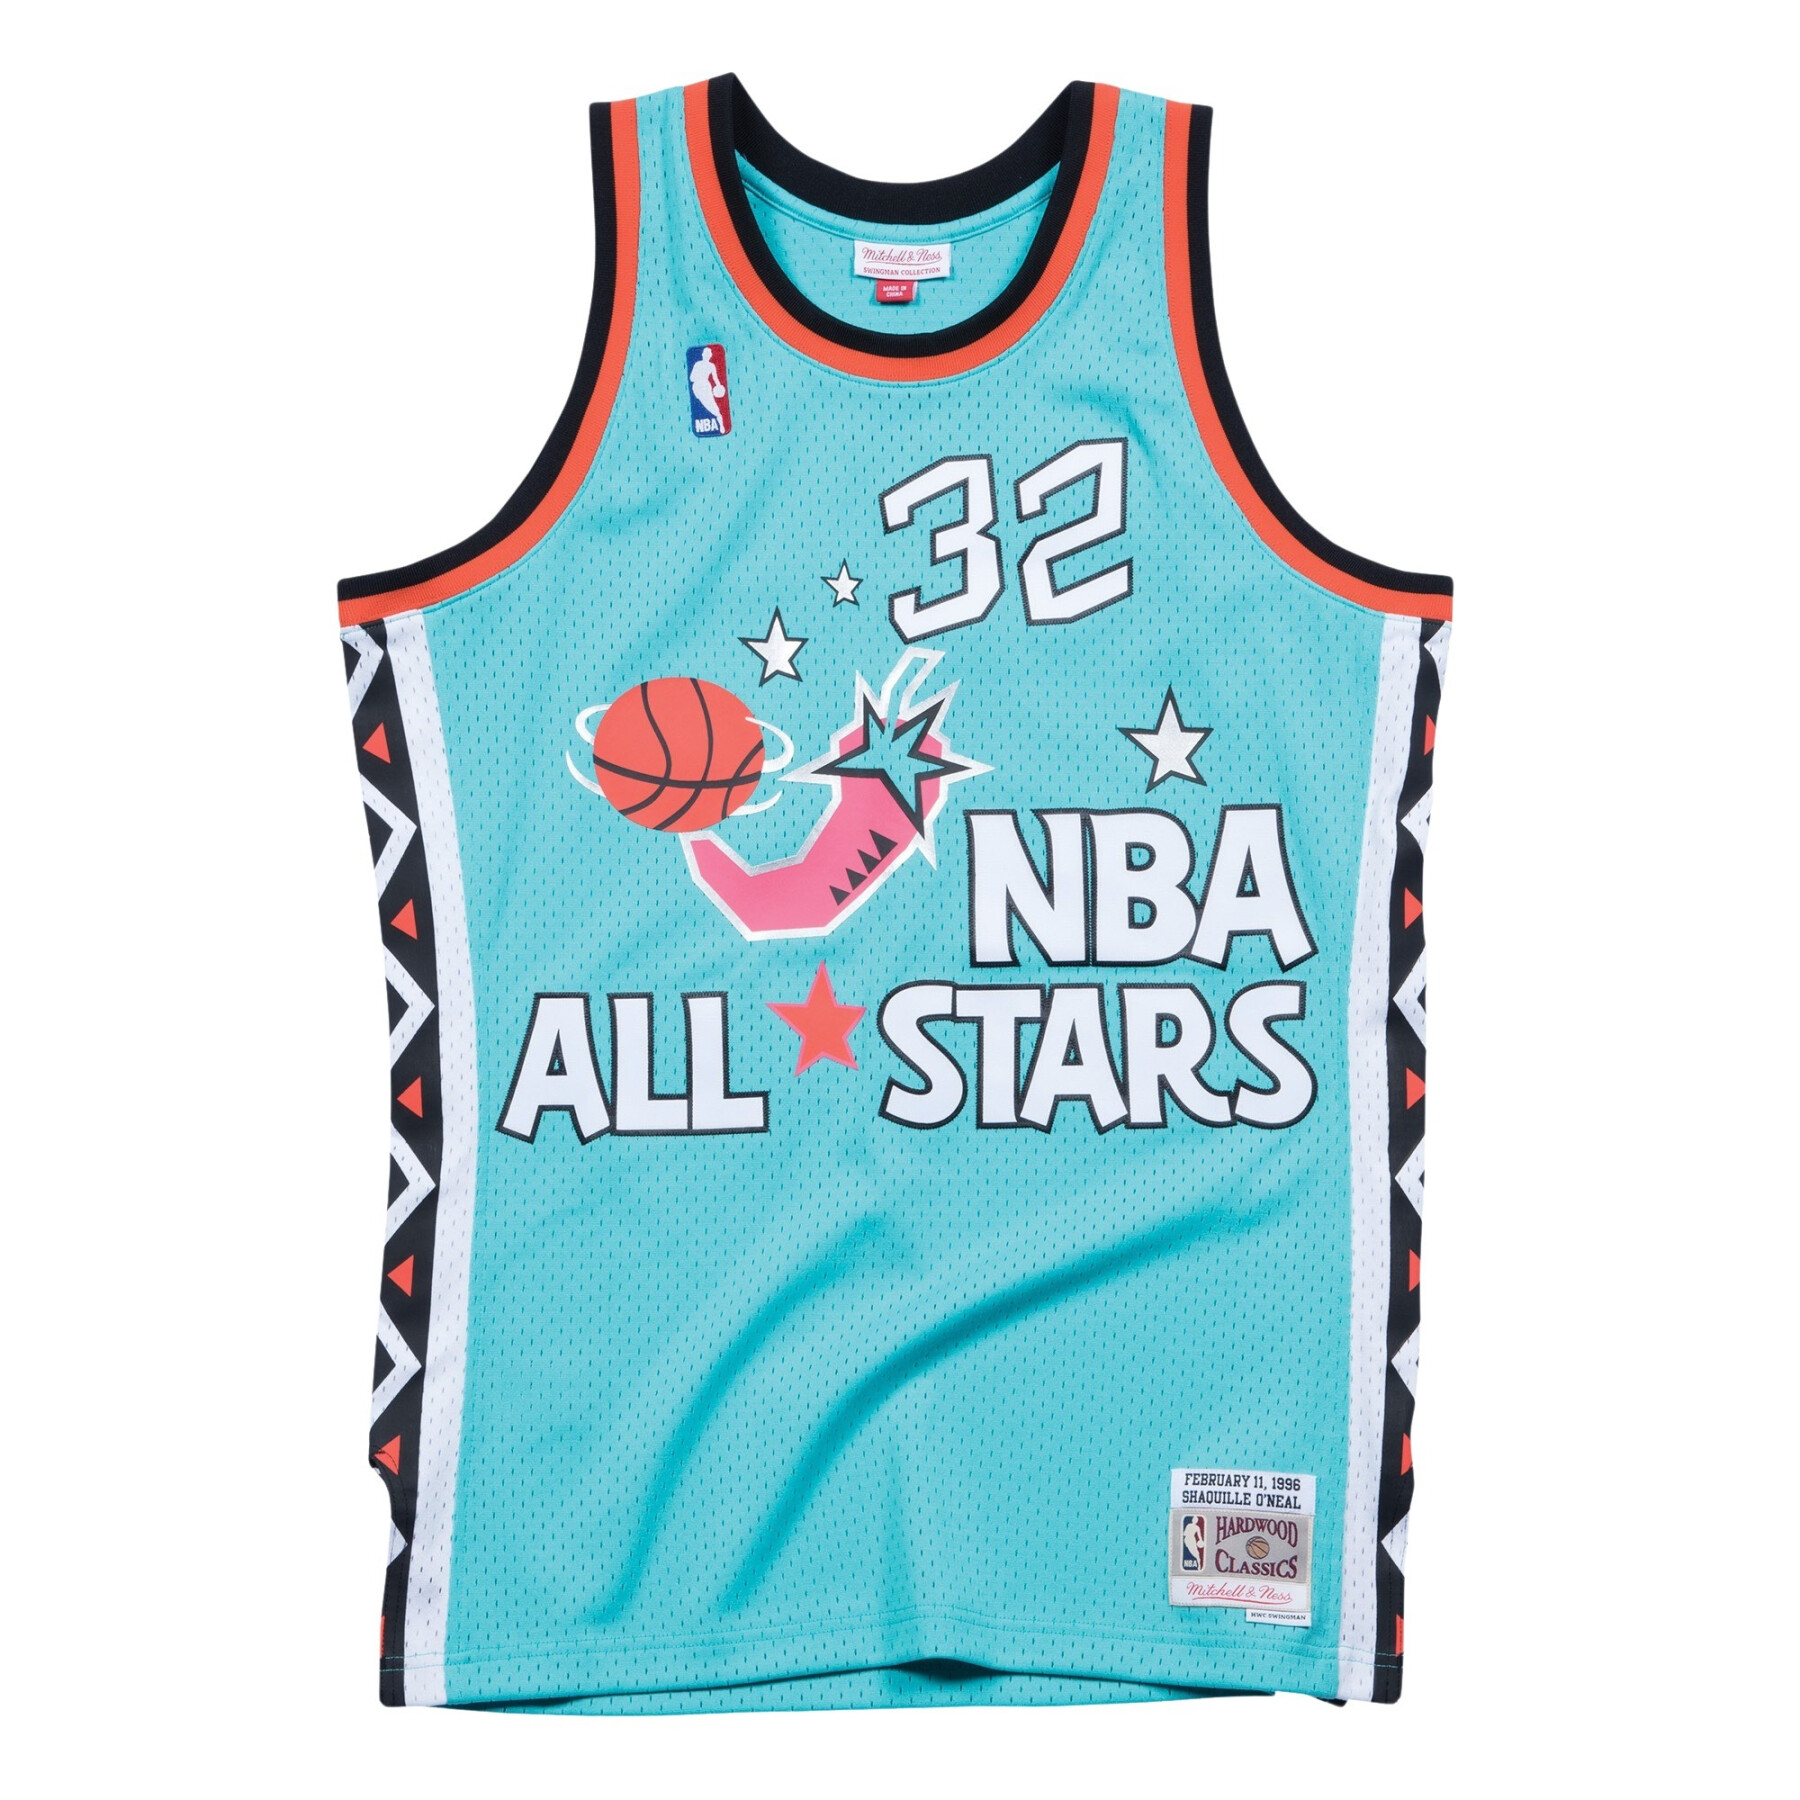 Jersey NBA All Star East 1996/97 Shaquille O'Neal